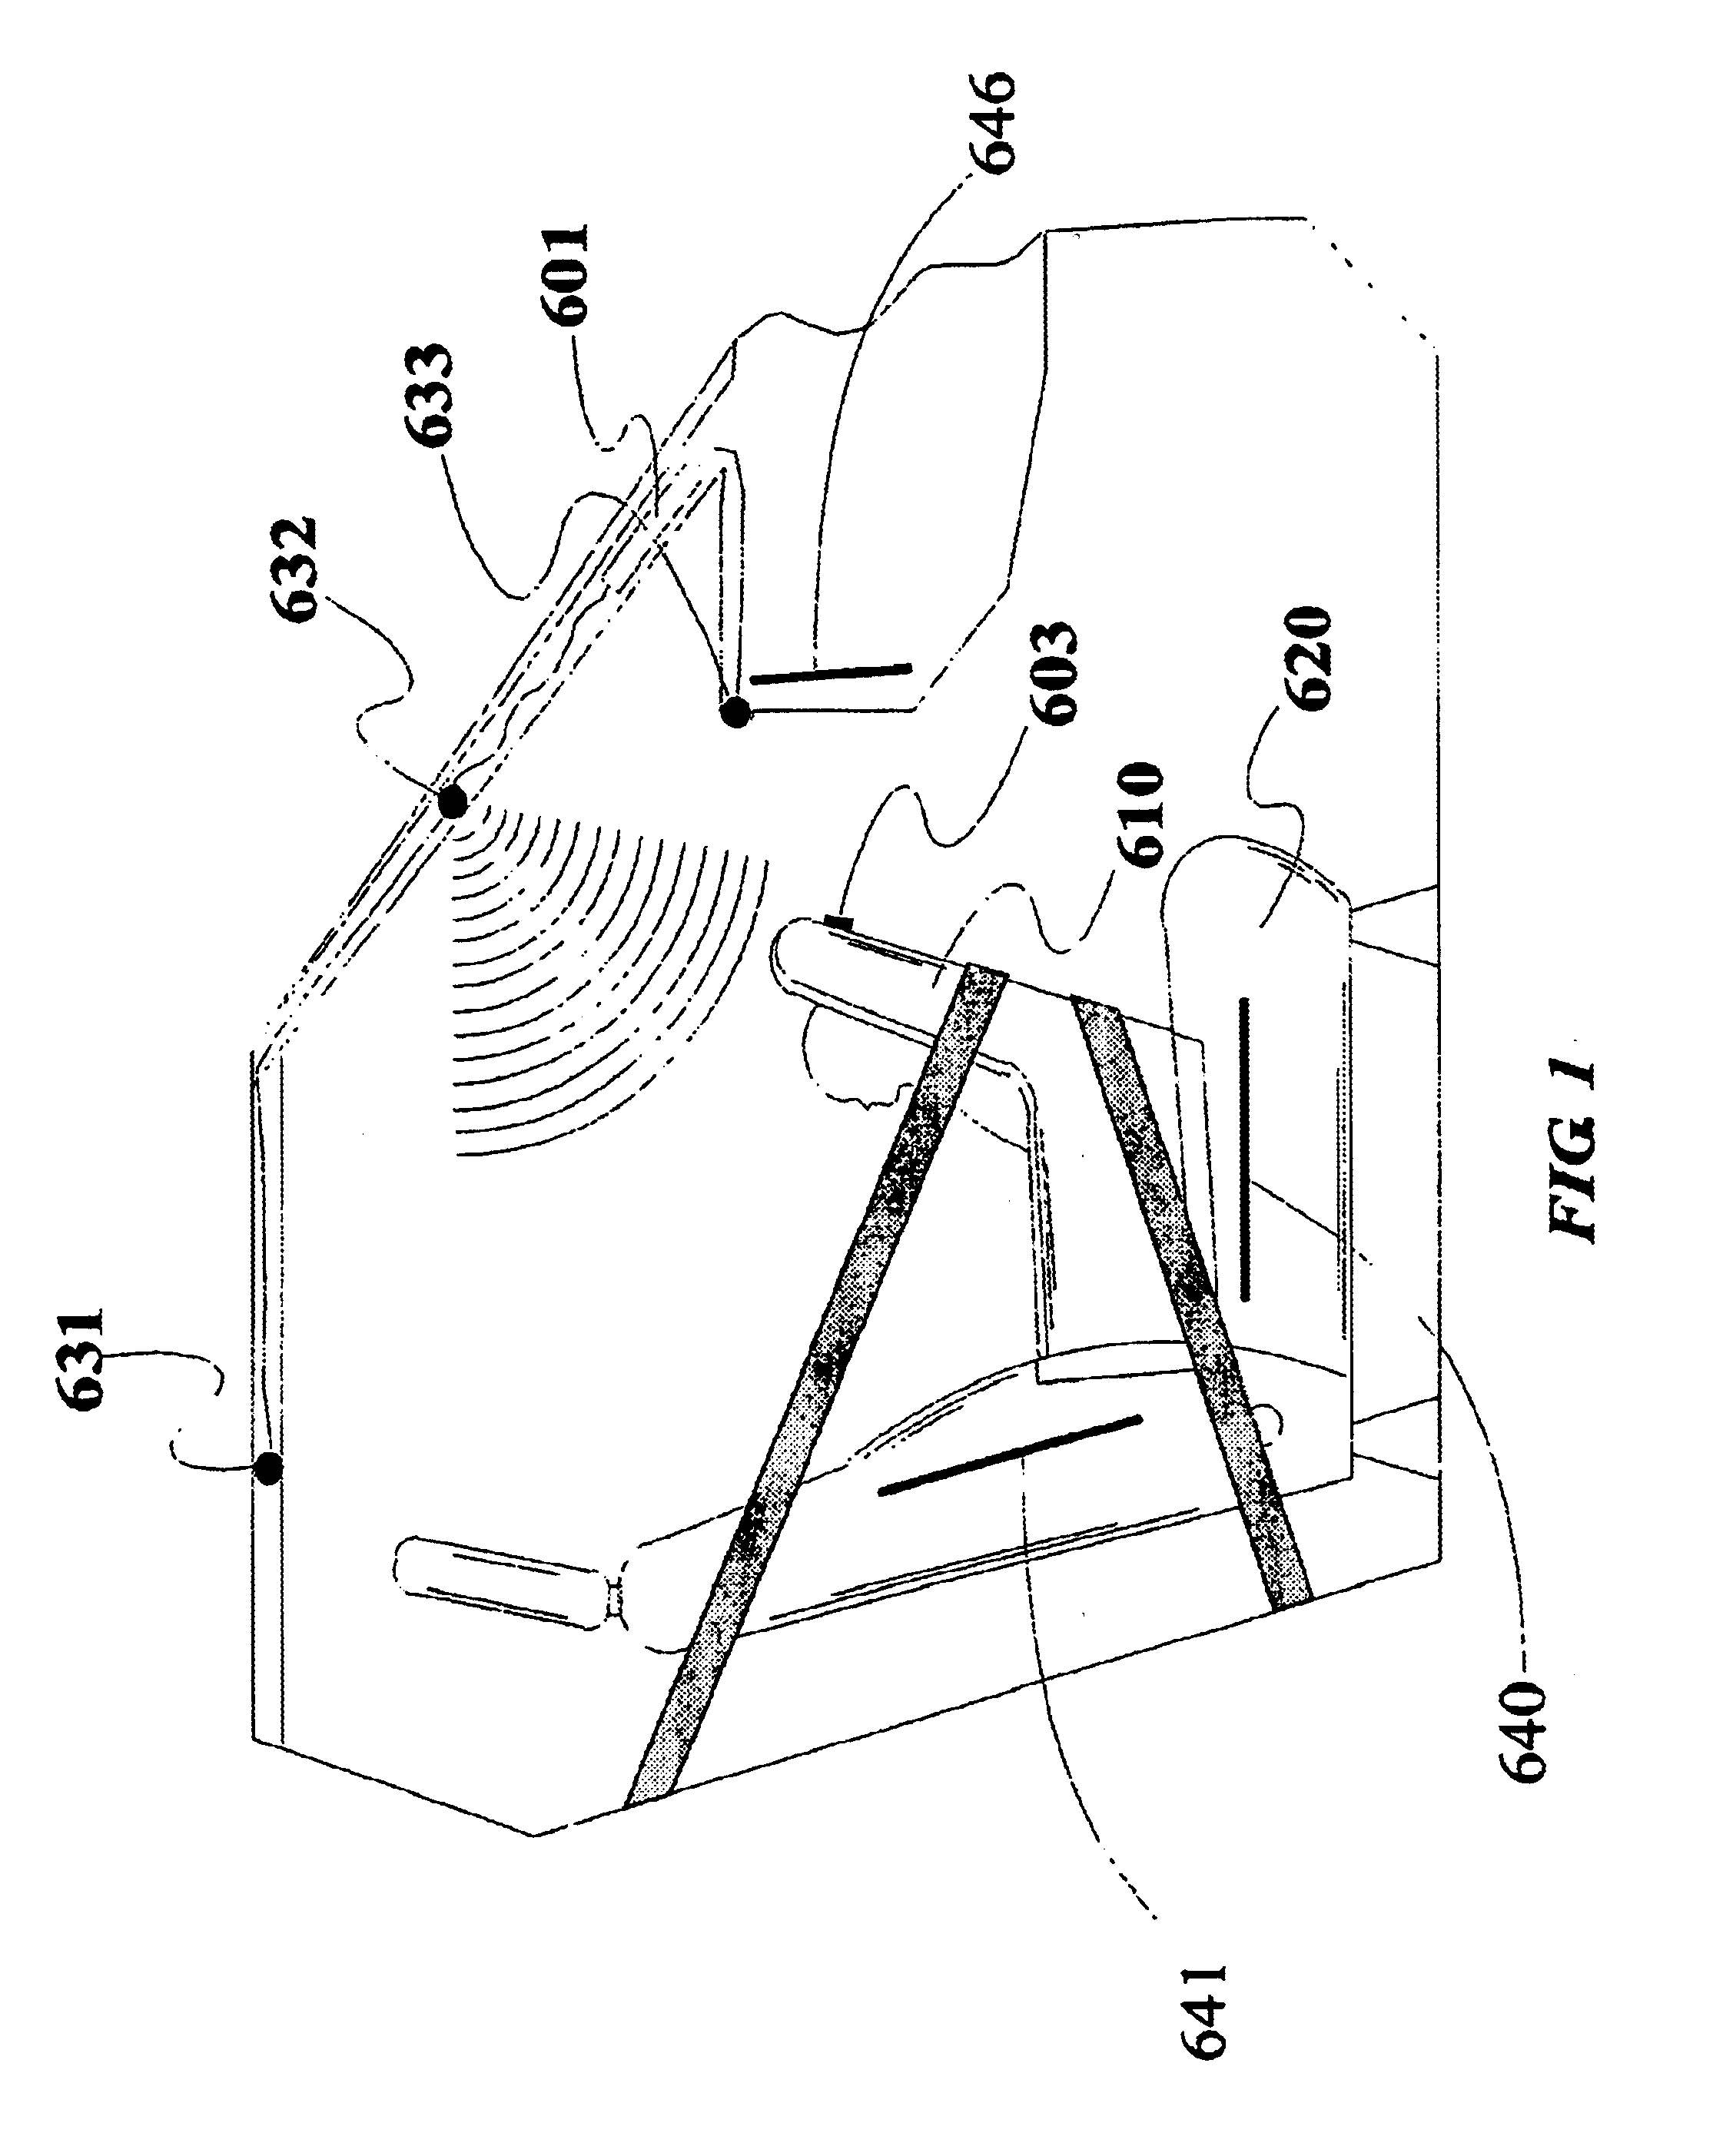 Method and apparatus for controlling a vehicular component